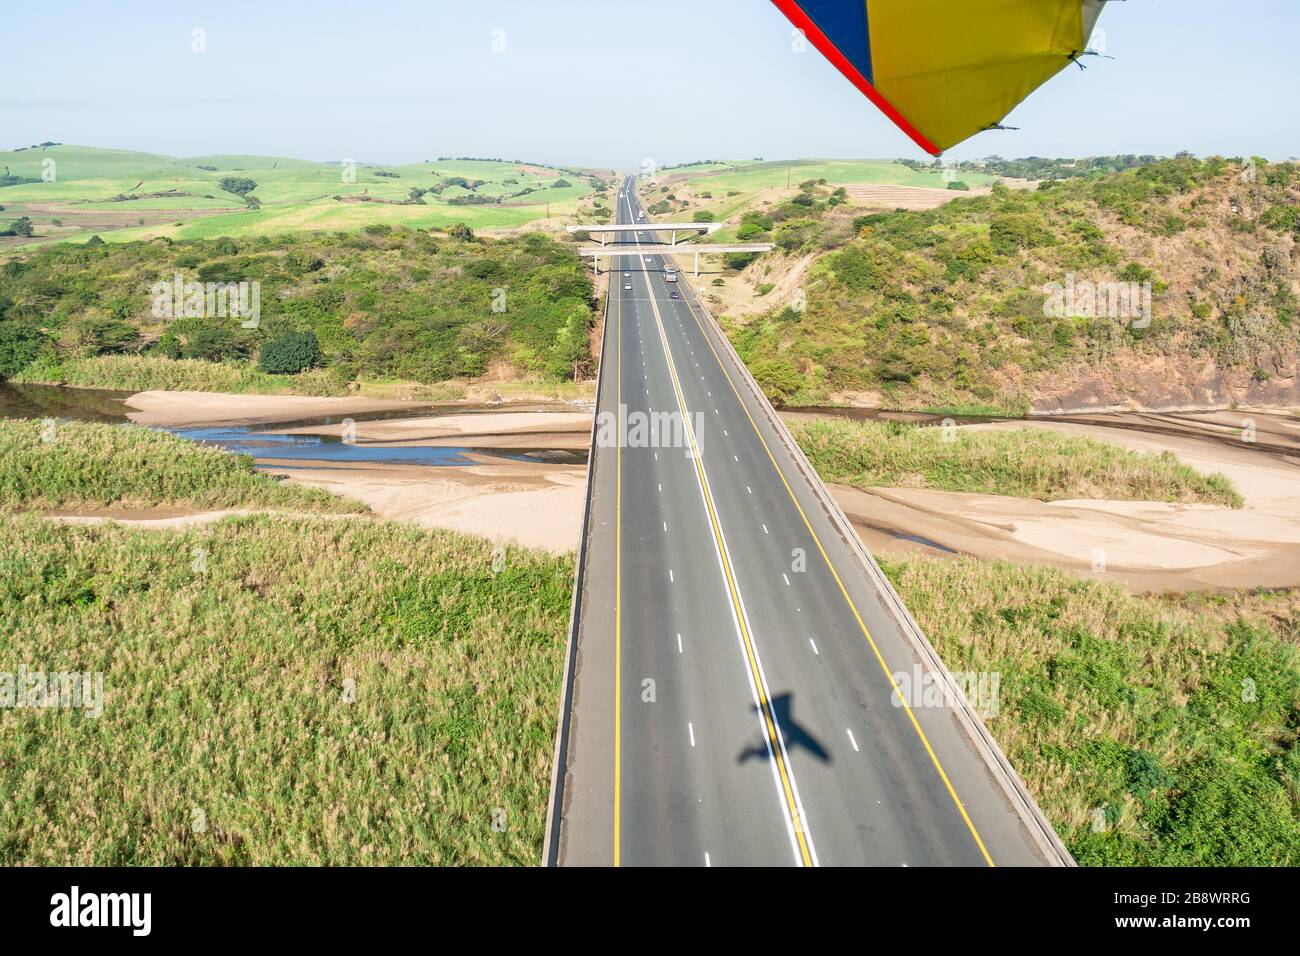 Flying aerial view passing over N2 toll road dual lanes traffic wide river overhead with low water sandbars through rural farmlands. Stock Photo